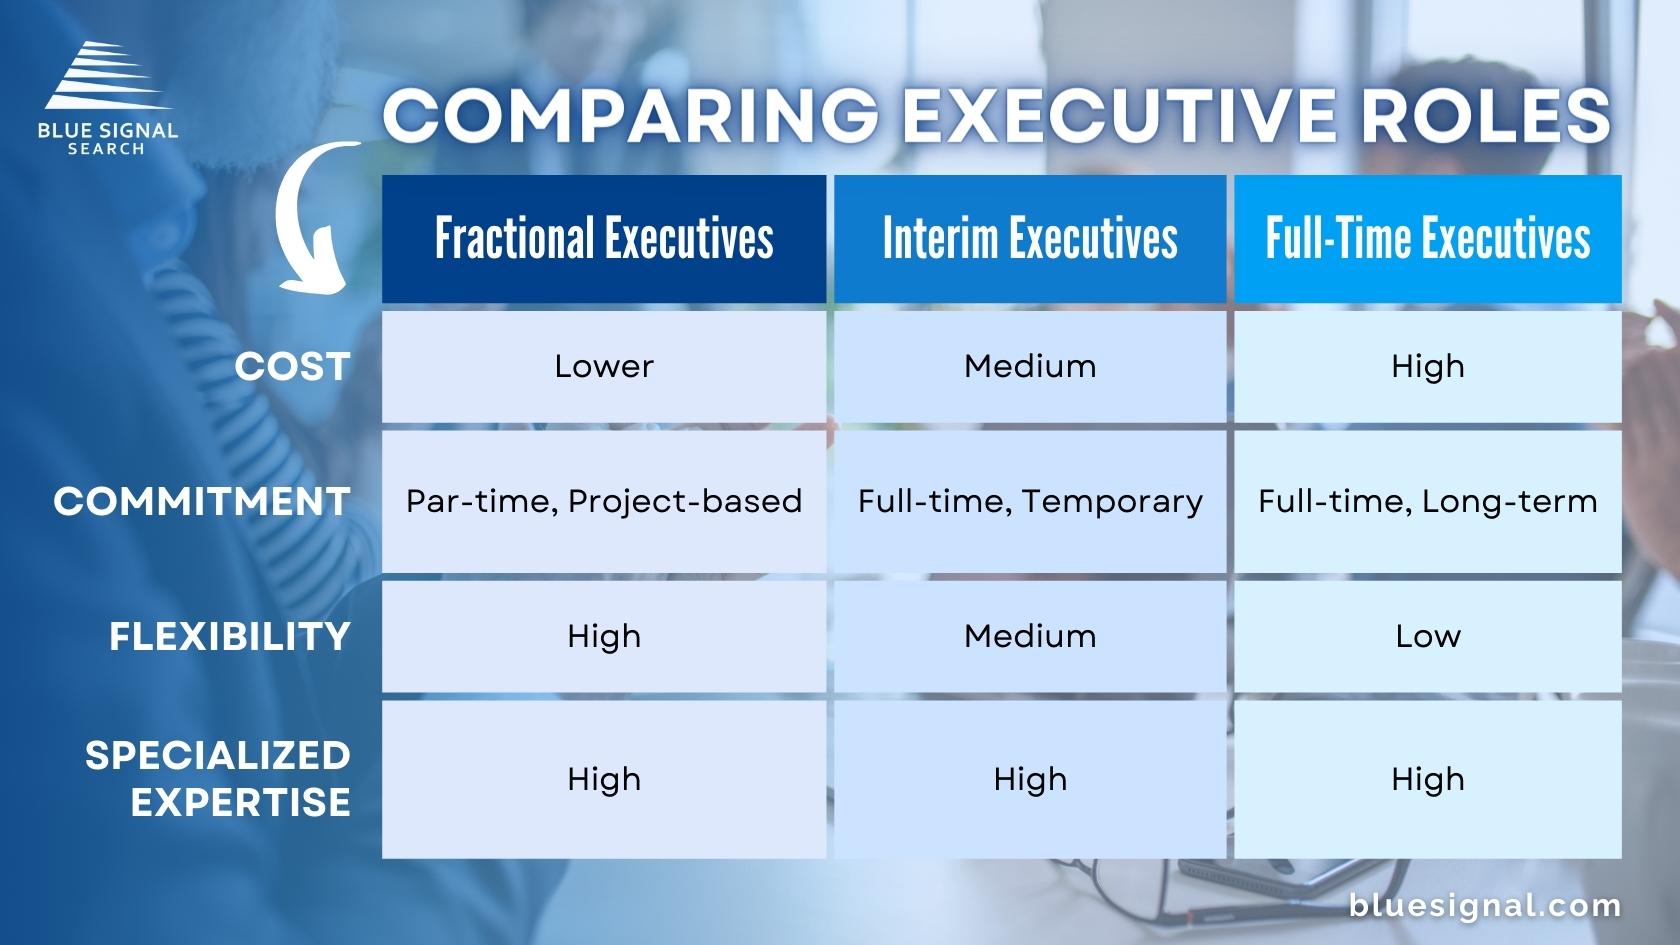 Comparison chart showing the differences between fractional executives, interim executives, and full-time executives based on cost, commitment, flexibility, and specialized expertise.